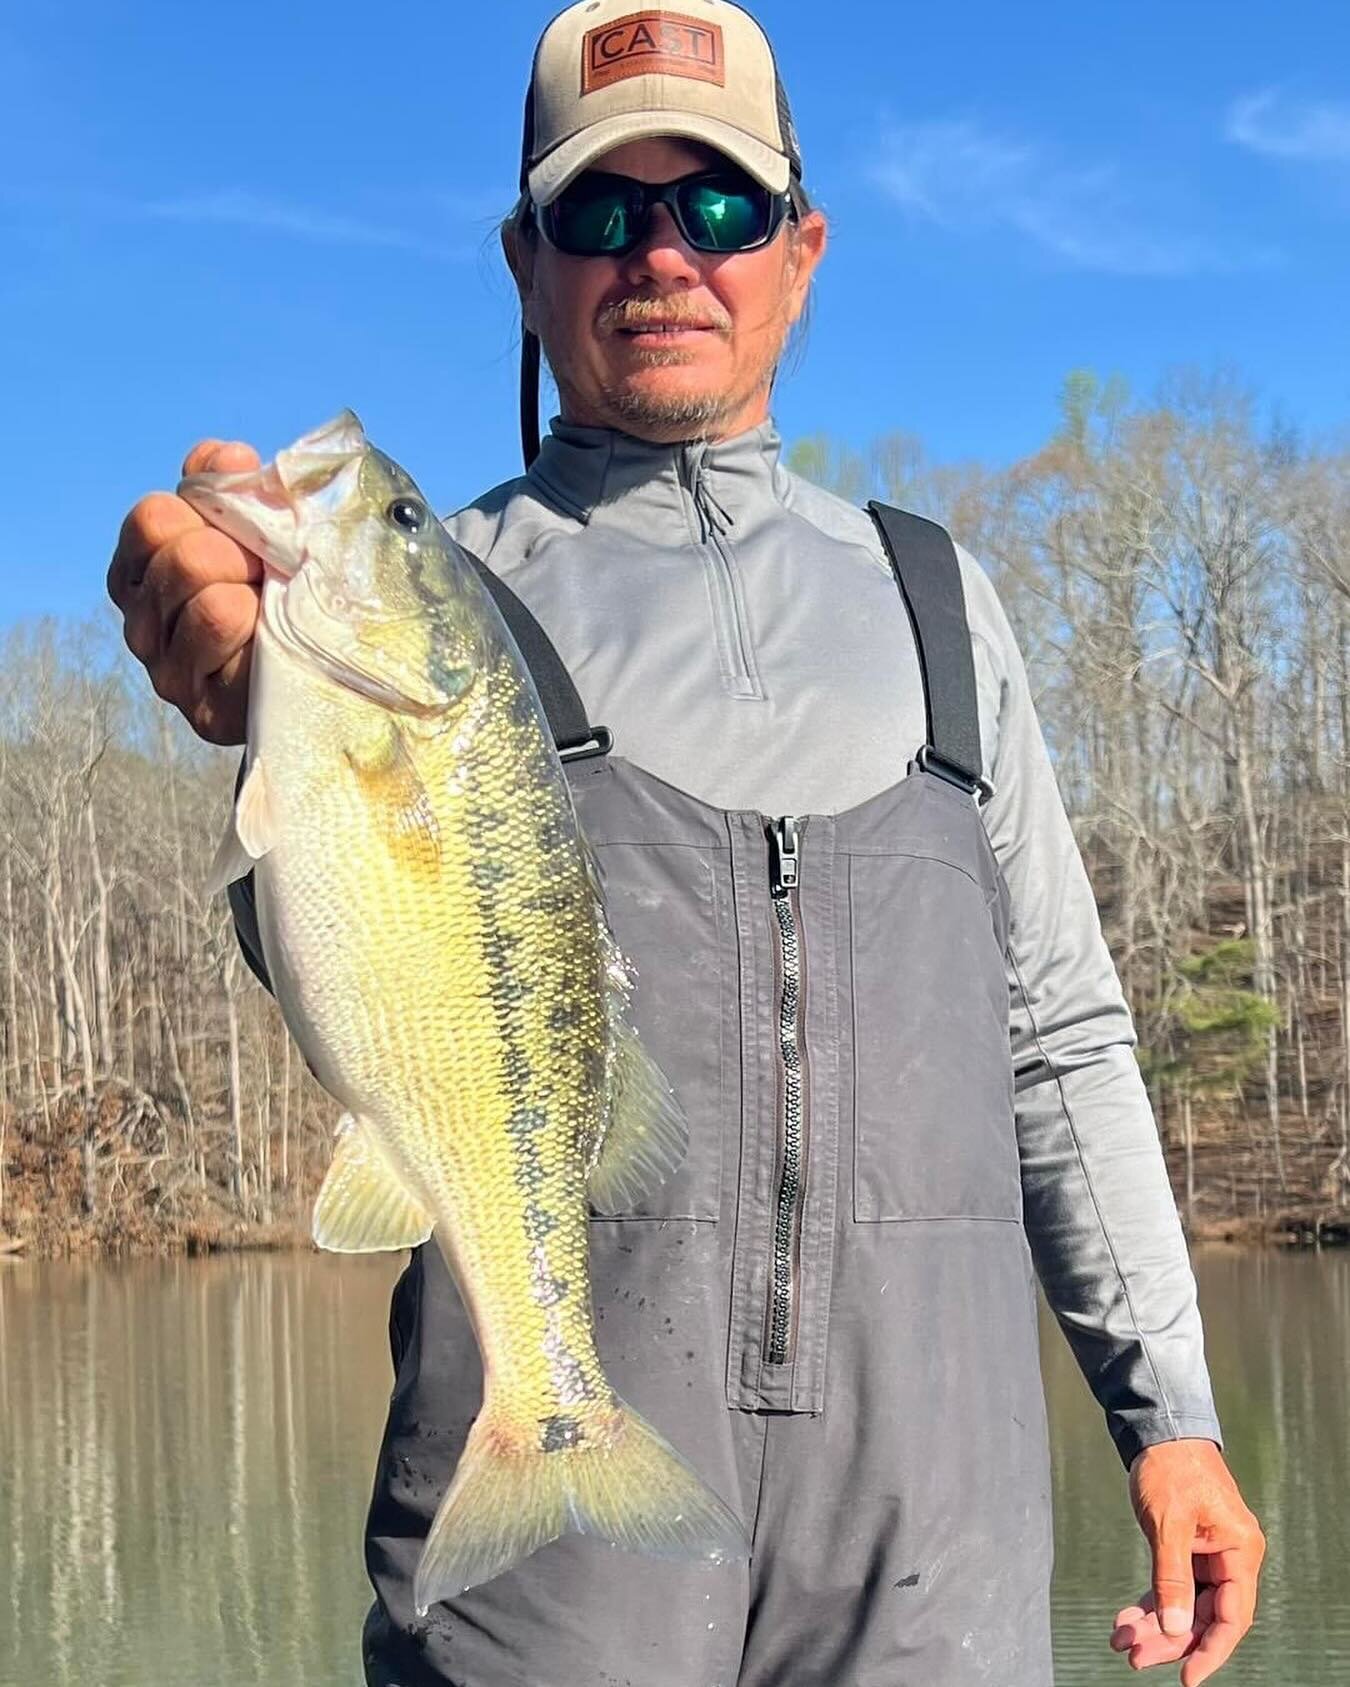 We had another strong day on the pond.  It&rsquo;s a great time of year to be on the water. 

Don&rsquo;t forget, the launch of the St Croix PHYSYX series of rods is tomorrow and the Dugout is stocked up on them.  Everyone who purchases a PHYSYX from